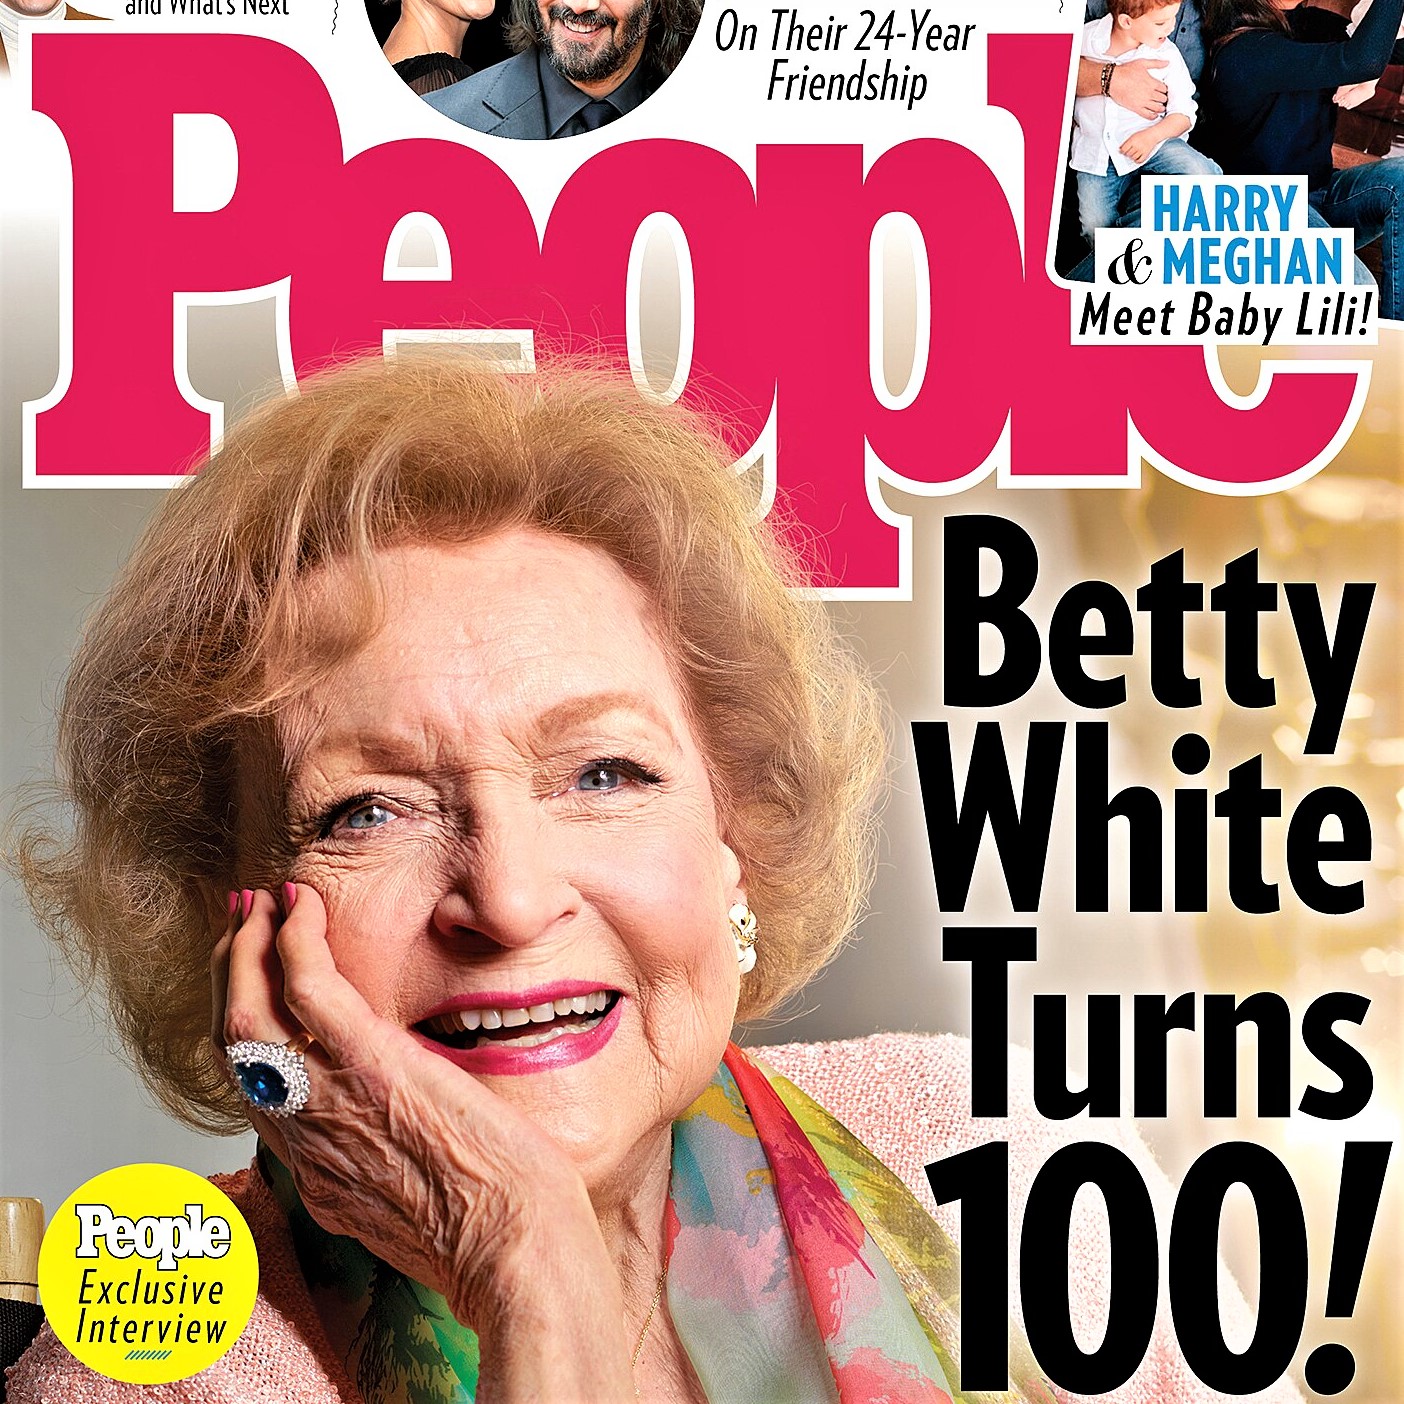 Betty White is interviewed by People magazine about her secrets to a happy life at 100